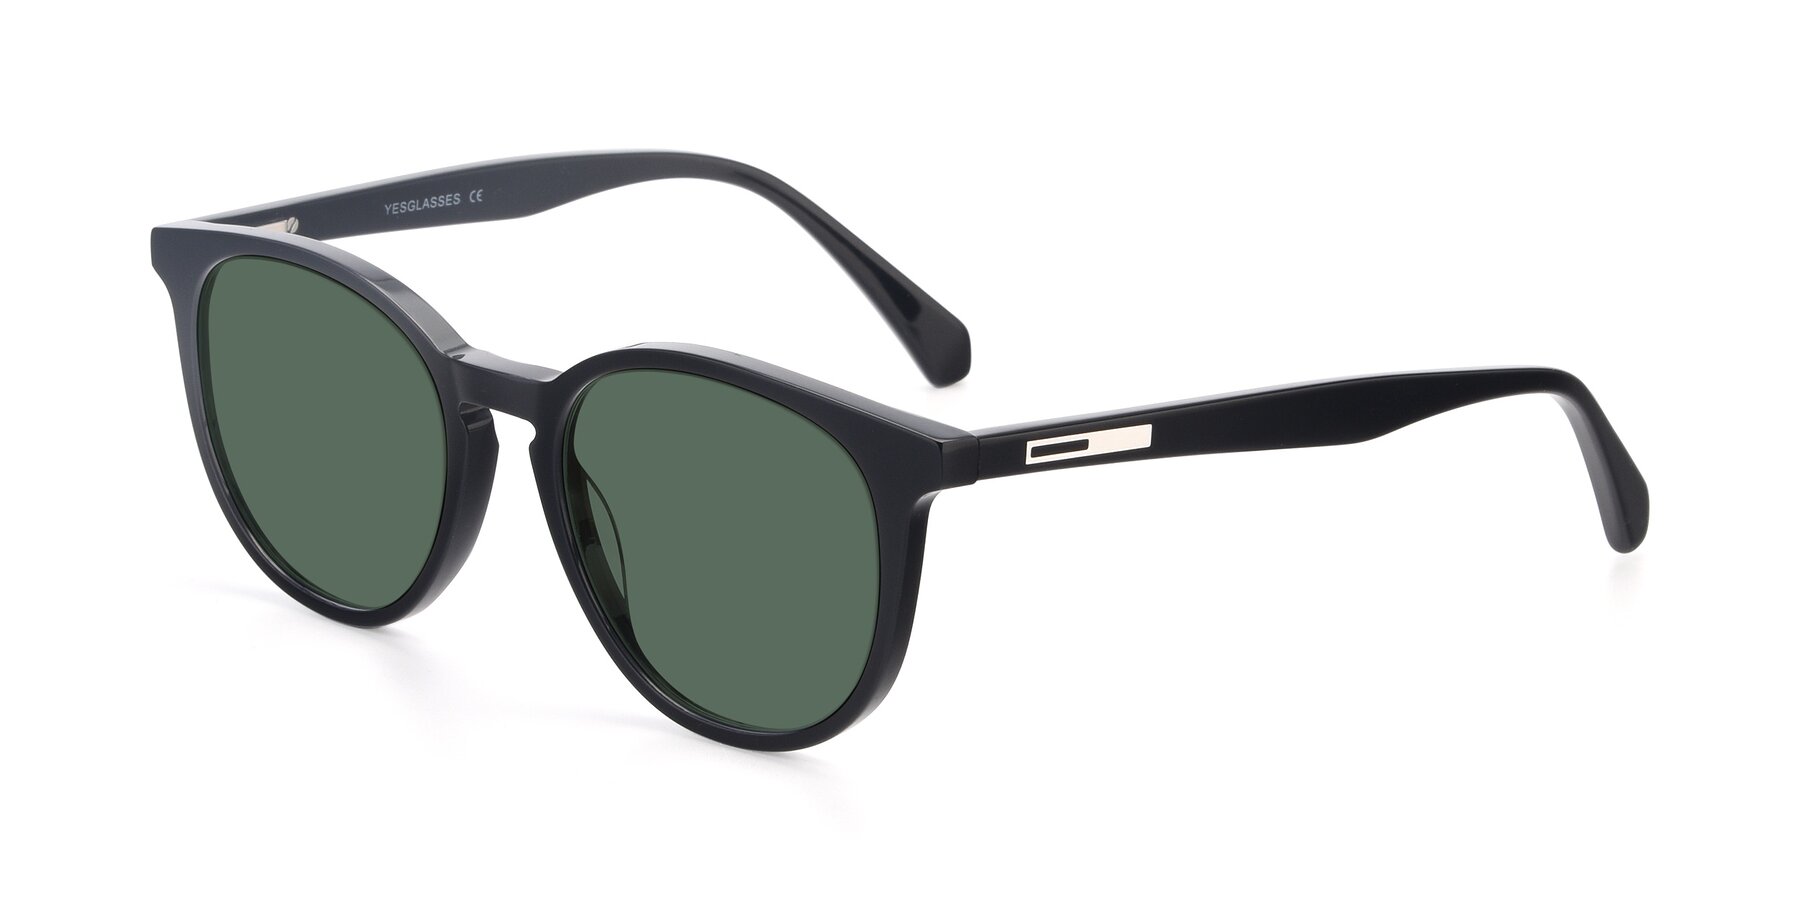 Angle of 17721 in Black with Green Polarized Lenses